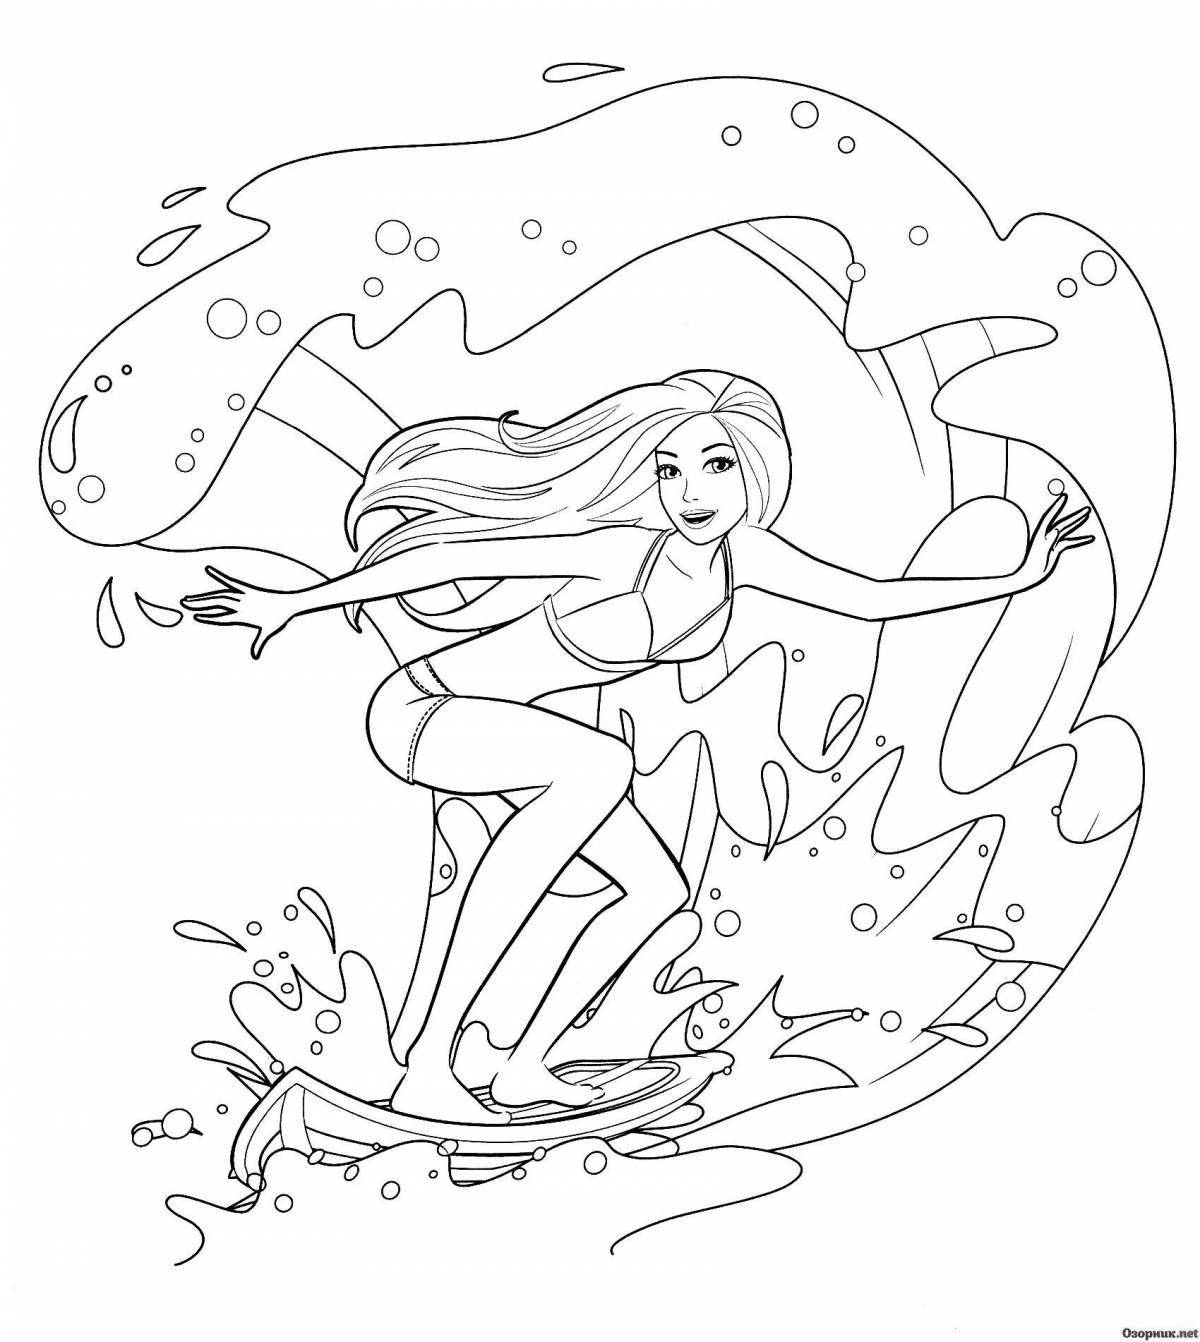 Coloring page freaky barbie on the beach